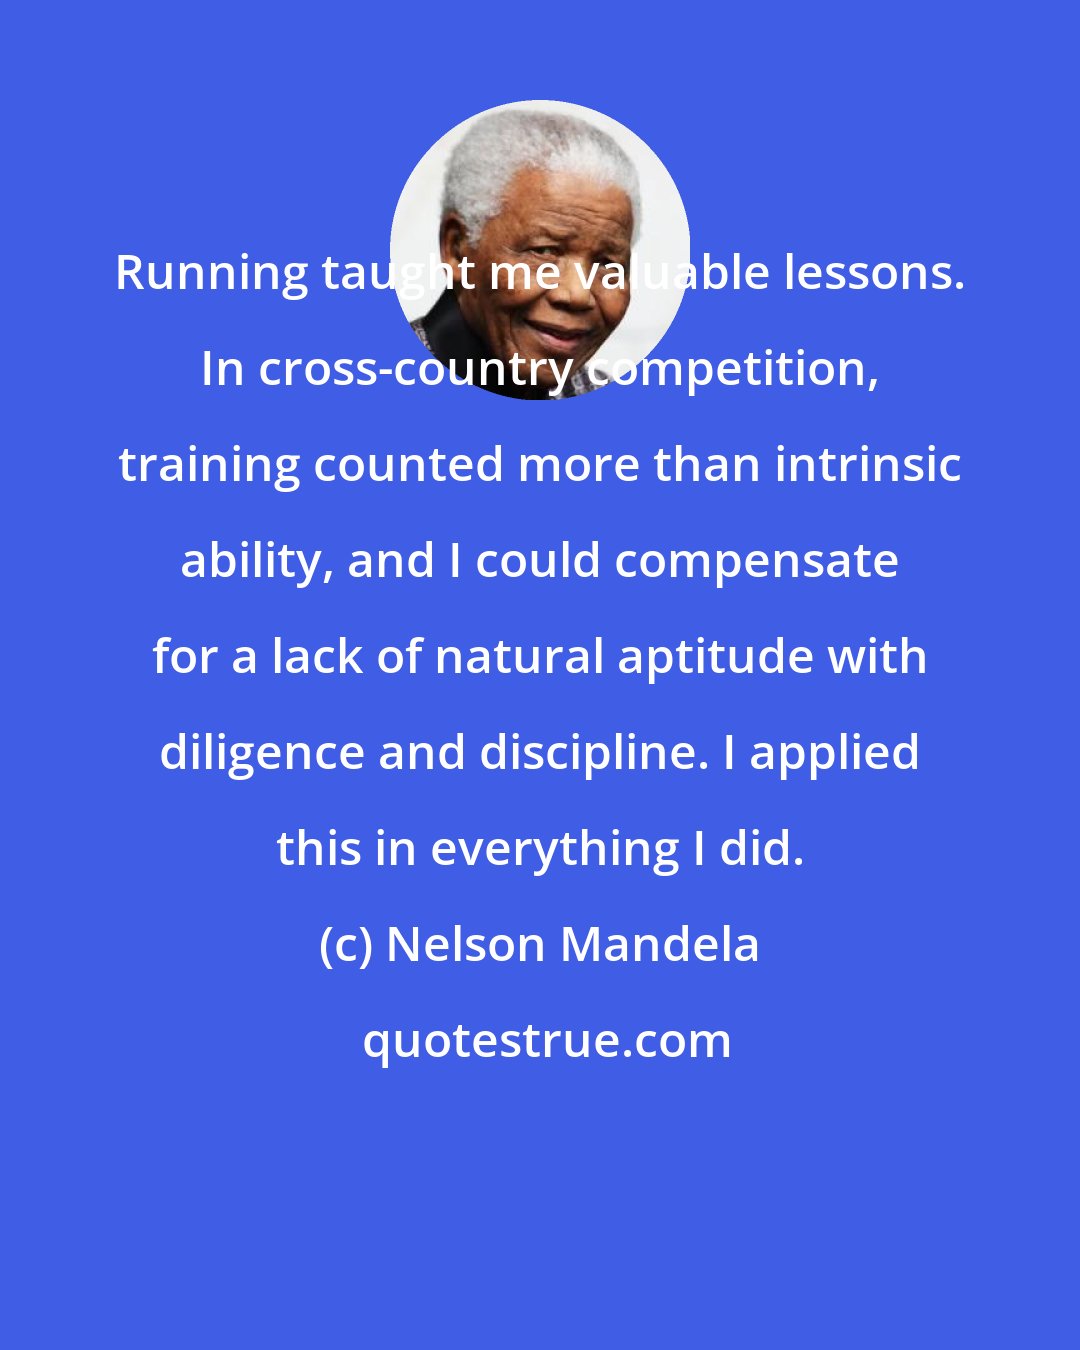 Nelson Mandela: Running taught me valuable lessons. In cross-country competition, training counted more than intrinsic ability, and I could compensate for a lack of natural aptitude with diligence and discipline. I applied this in everything I did.